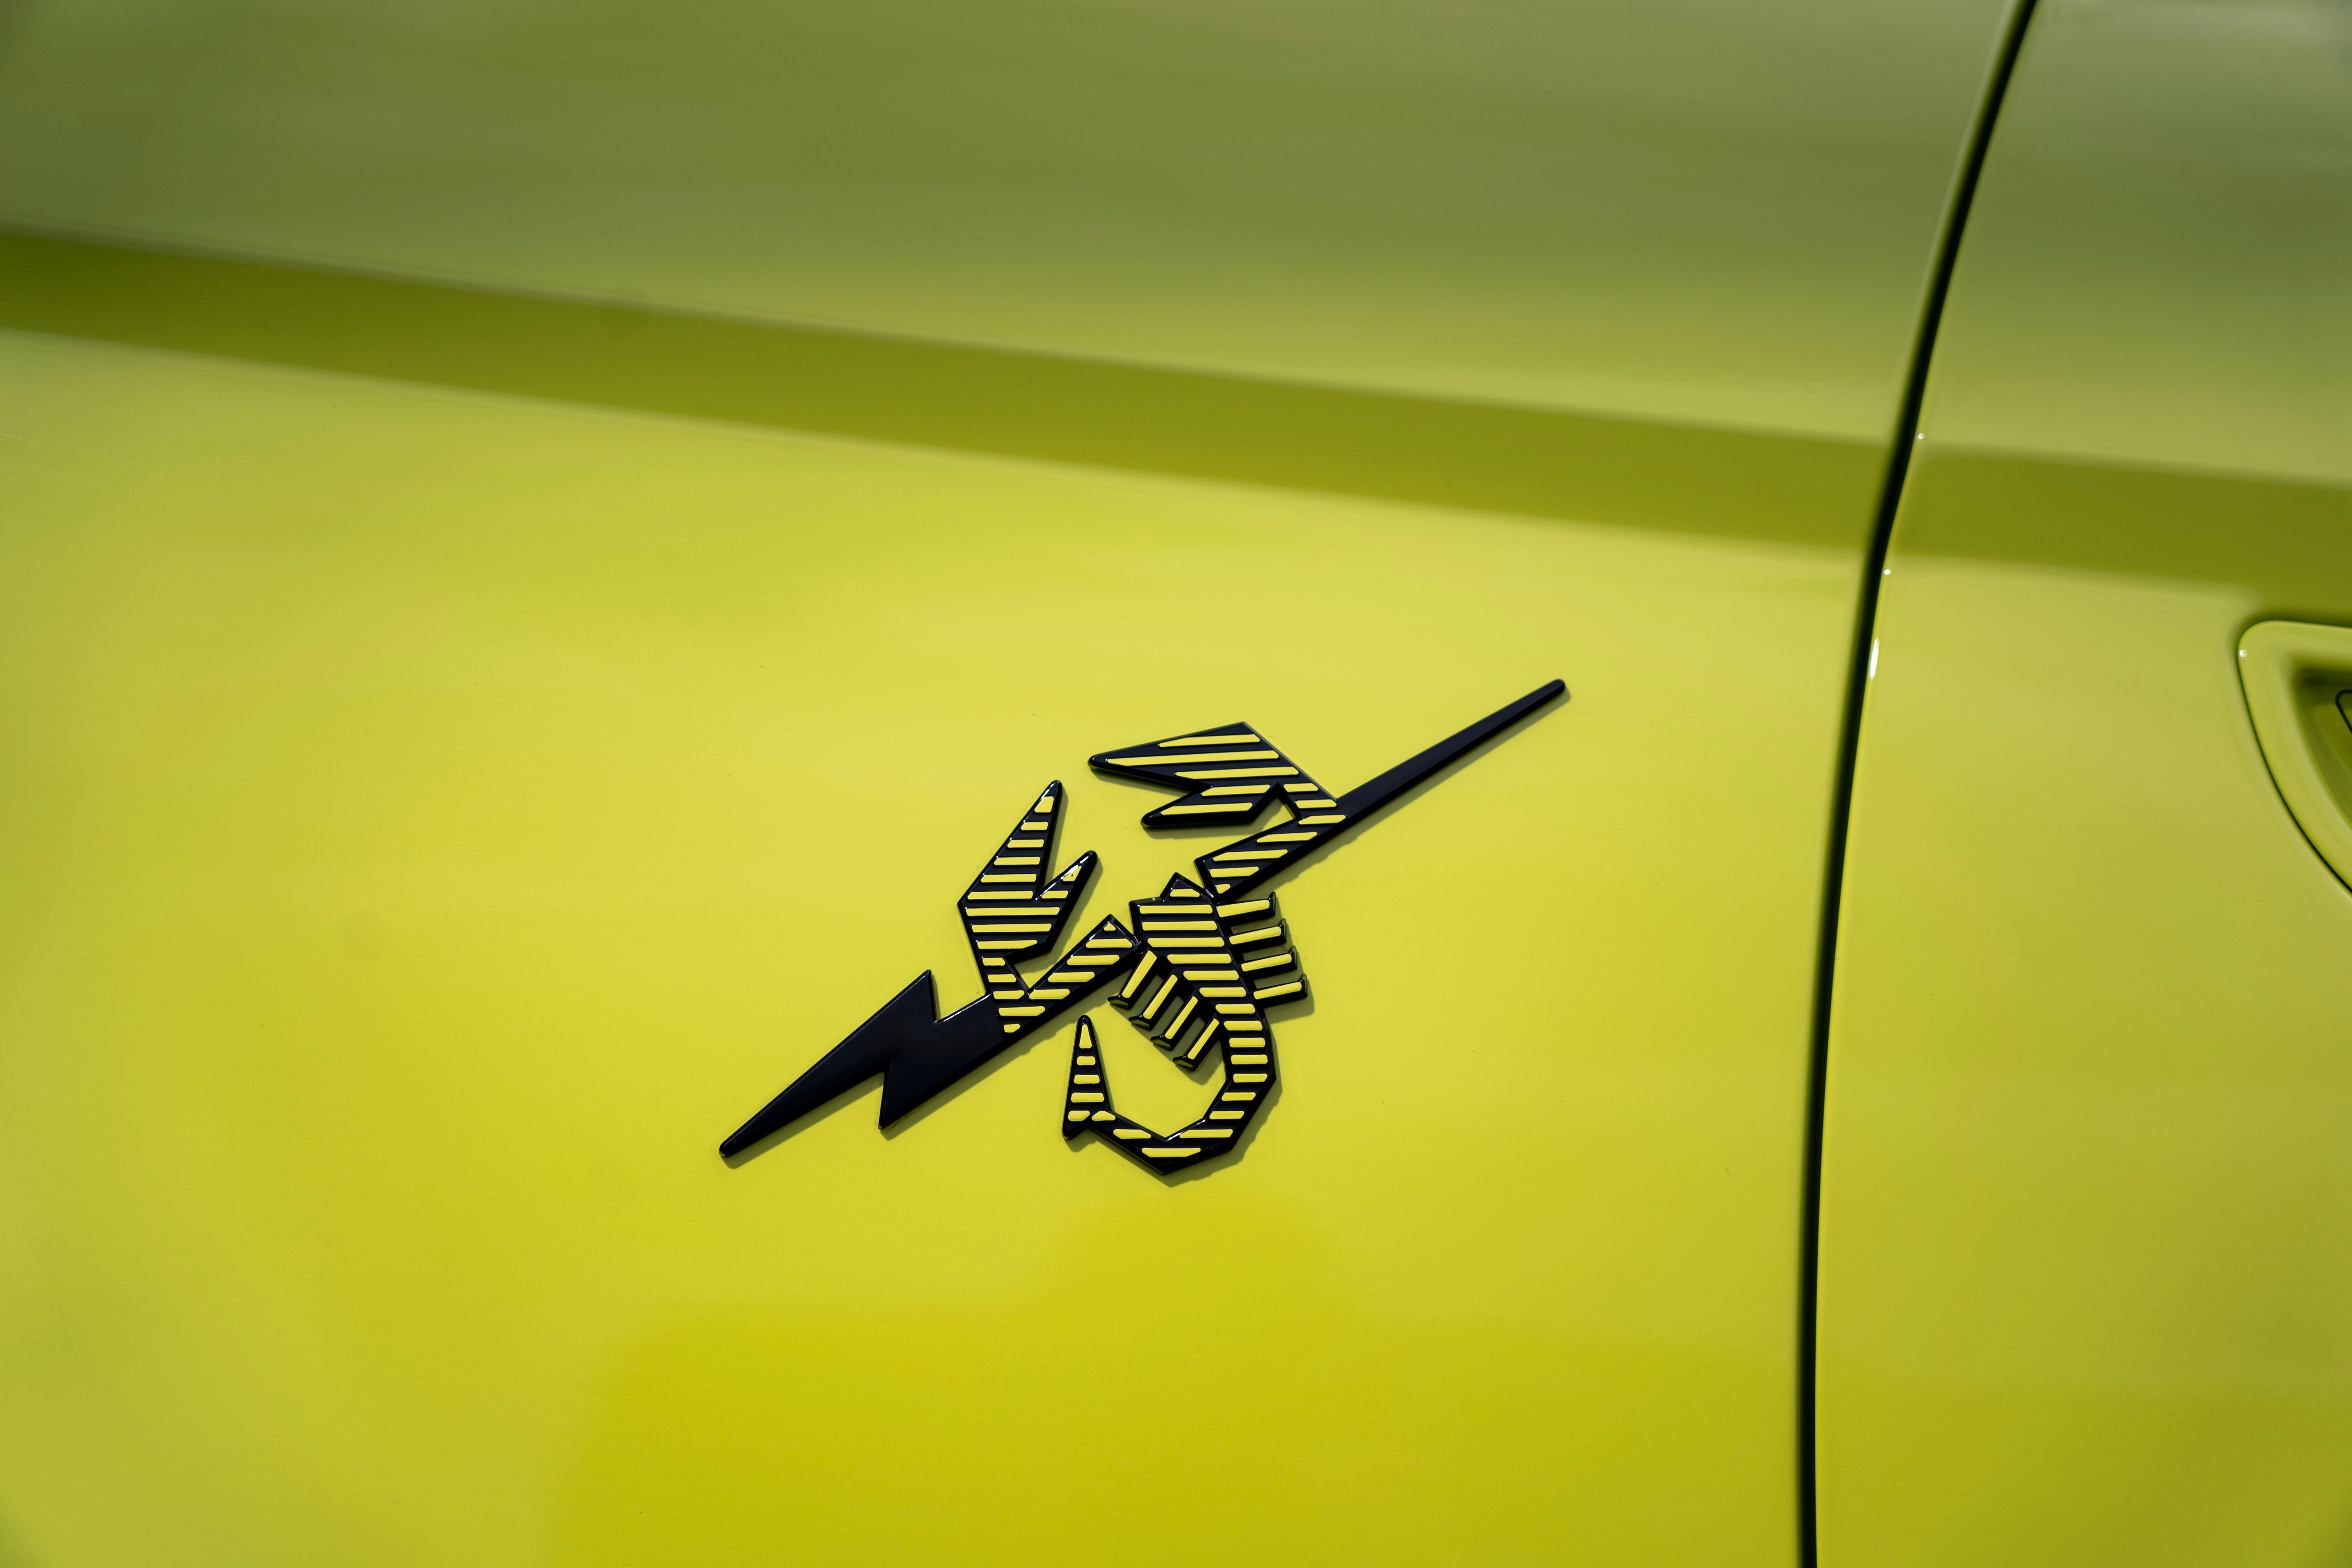 The Abarth scorpion badging and detailing is exquisitely executed throughout